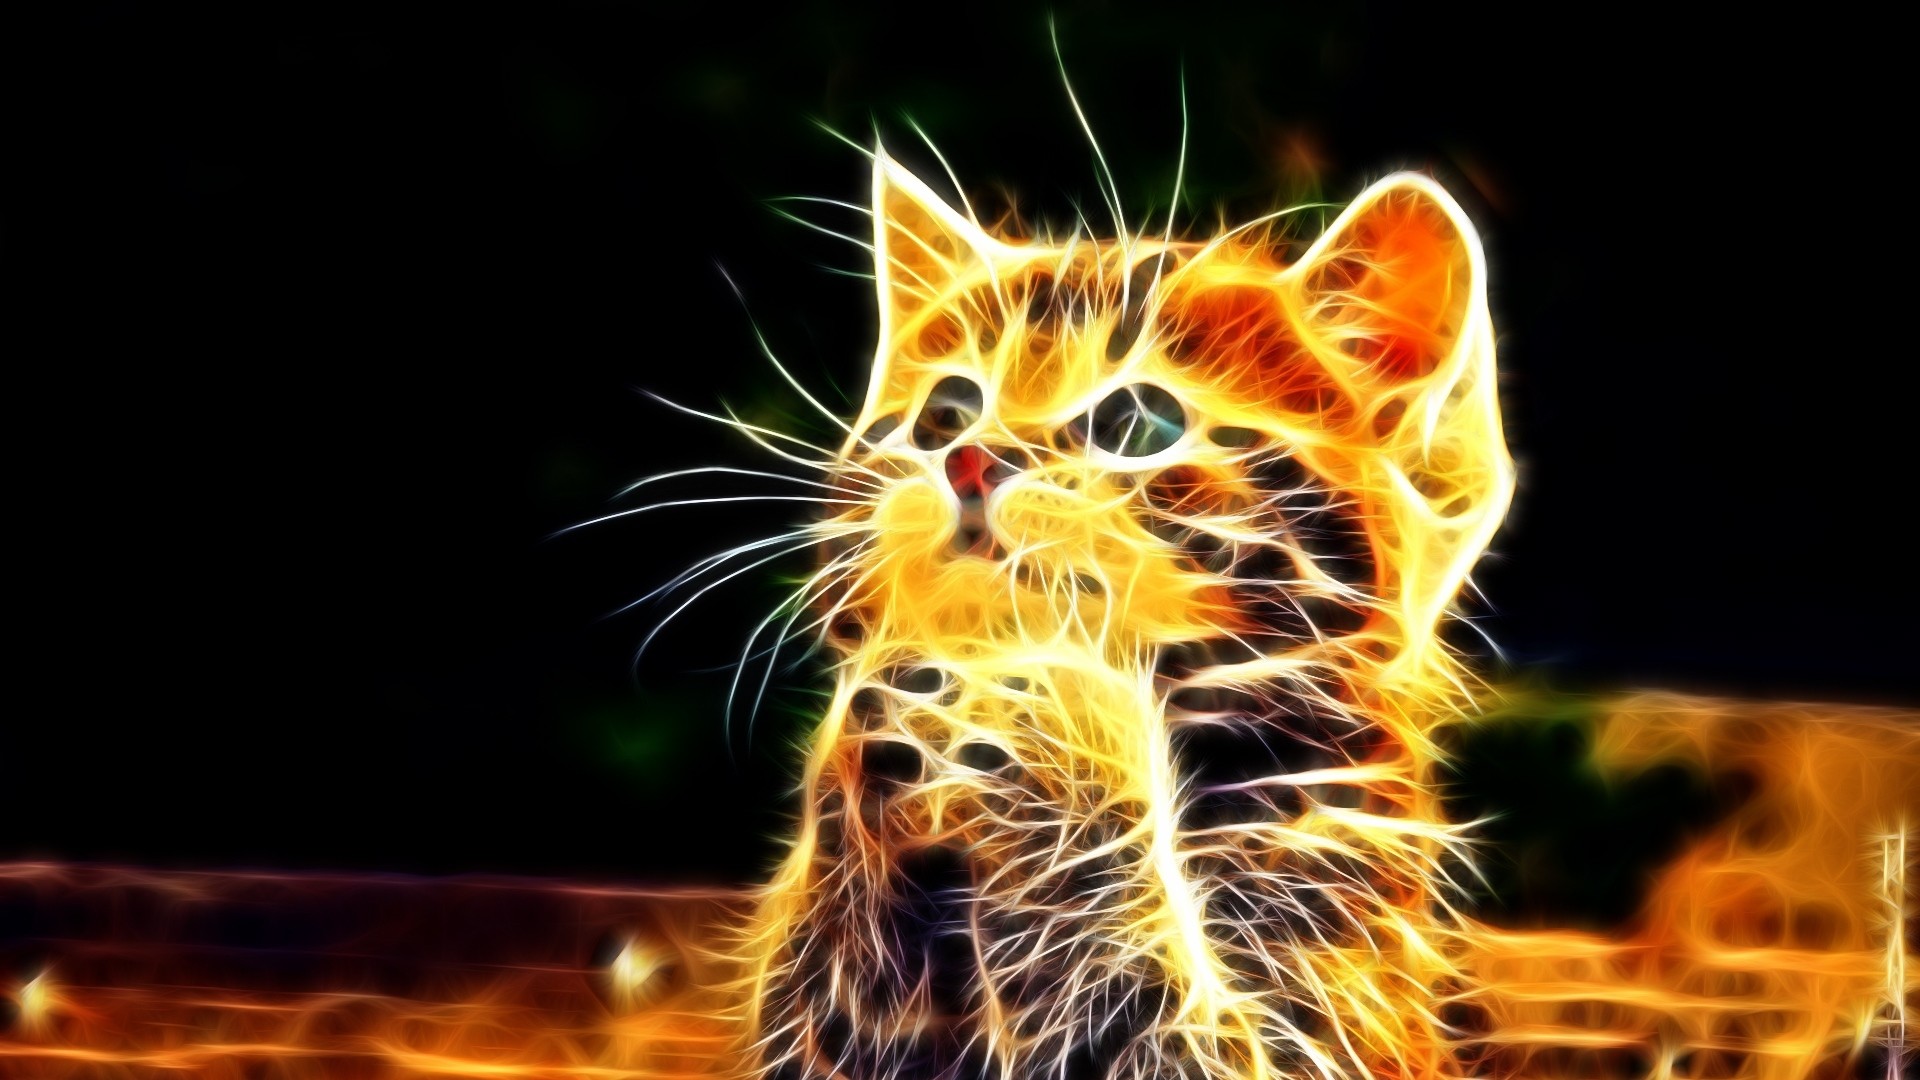 1920x1080 Related Wallpapers kitty, furry. Preview kitty